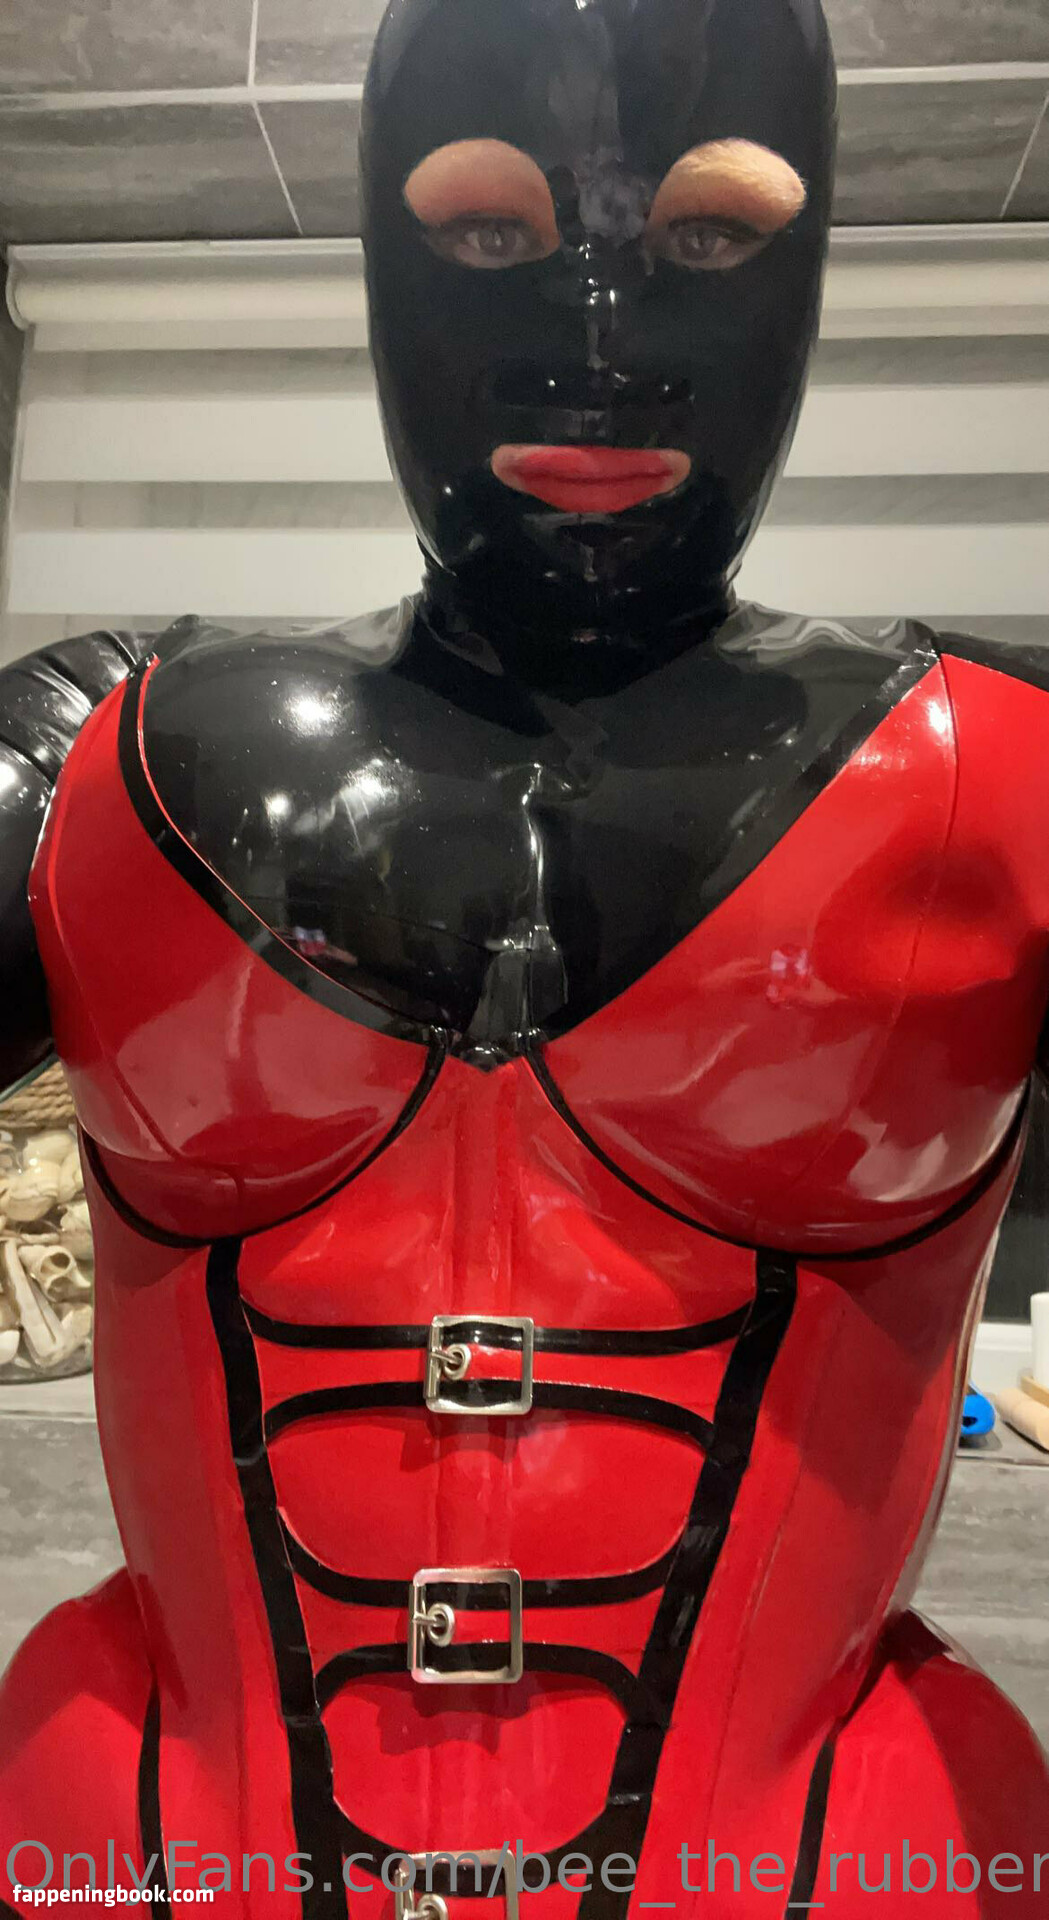 bee_the_rubber_doll Nude OnlyFans Leaks